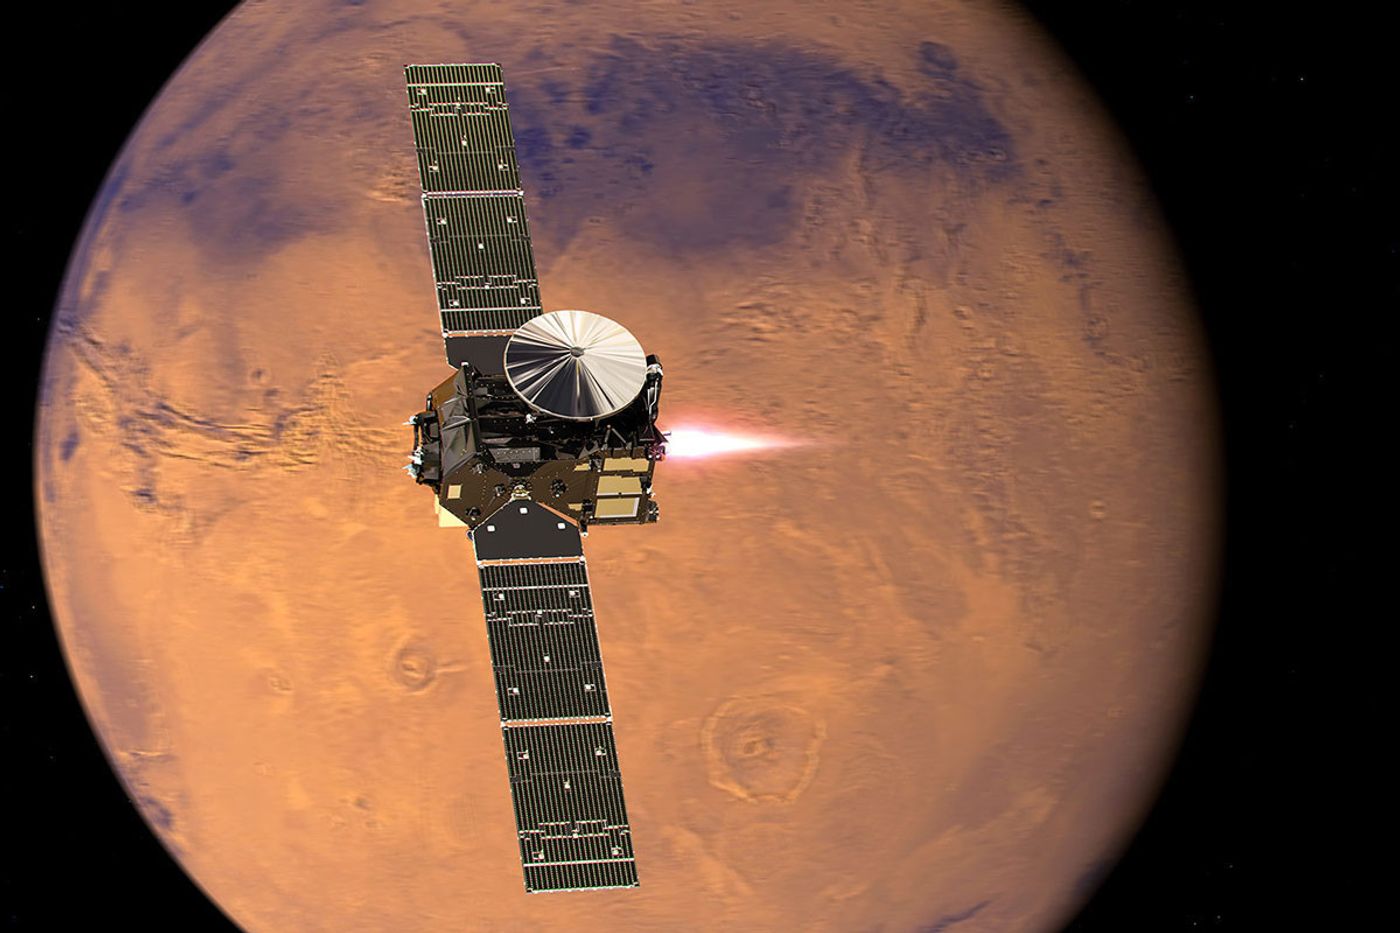 Europe and Russia are launching the ExoMars mission this week to get a better understanding of the red planet.